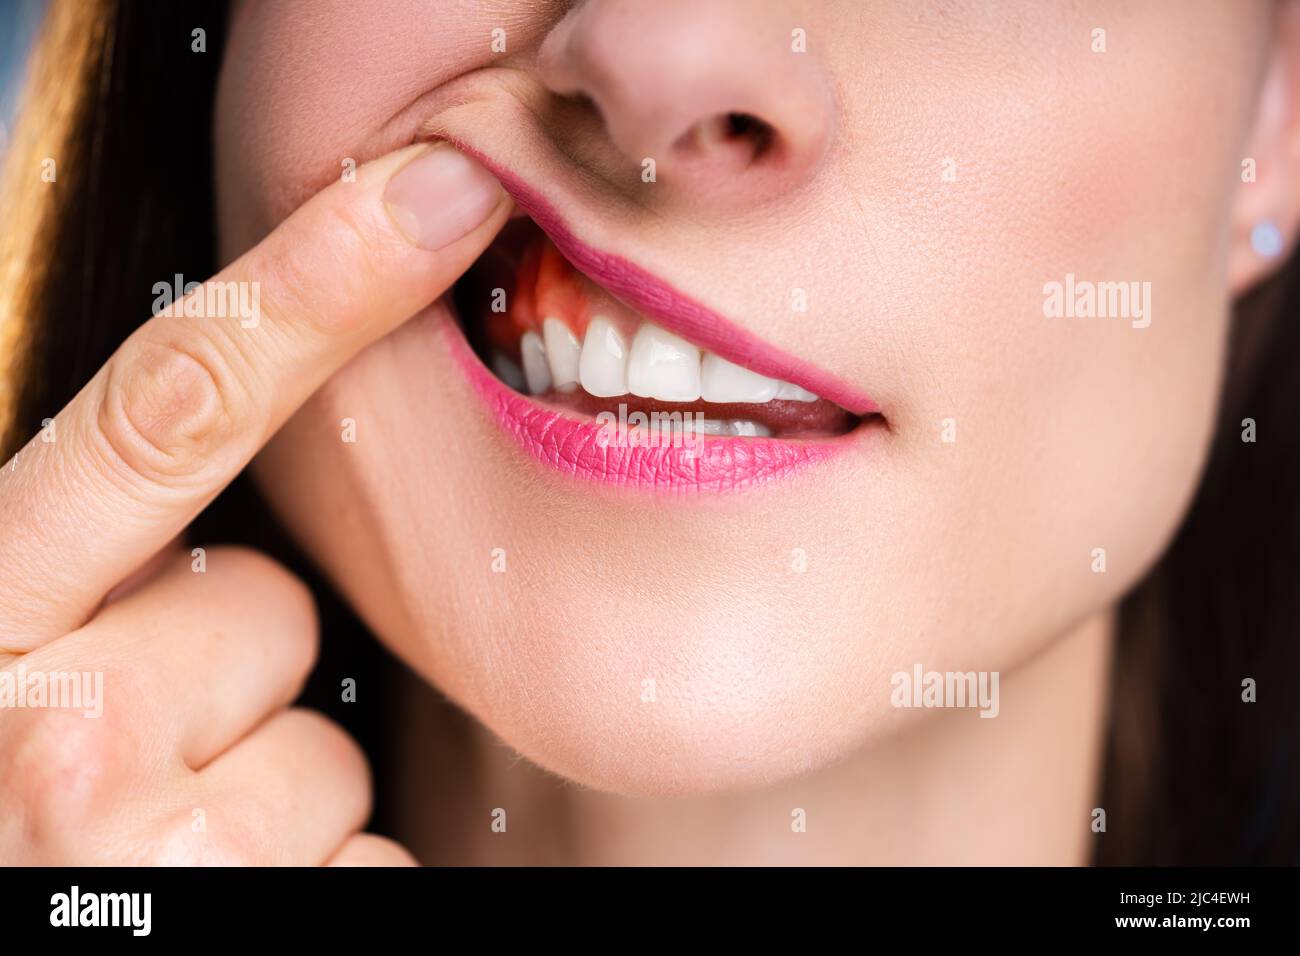 Close-up Of A Woman's Finger Showing Swelling Of Her Gum Stock Photo